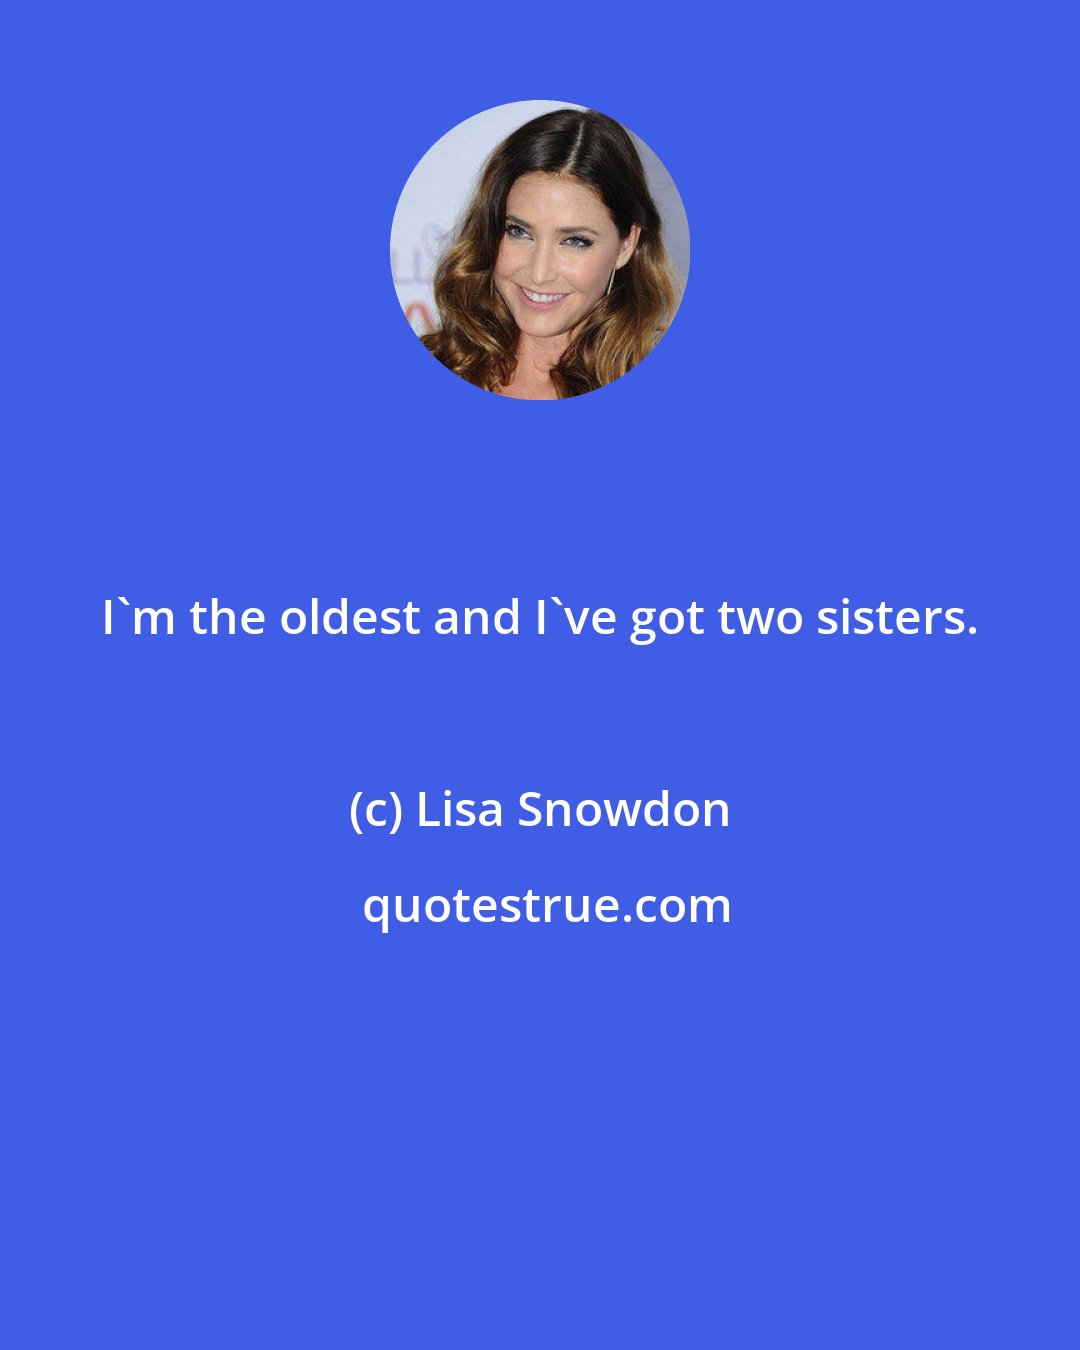 Lisa Snowdon: I'm the oldest and I've got two sisters.